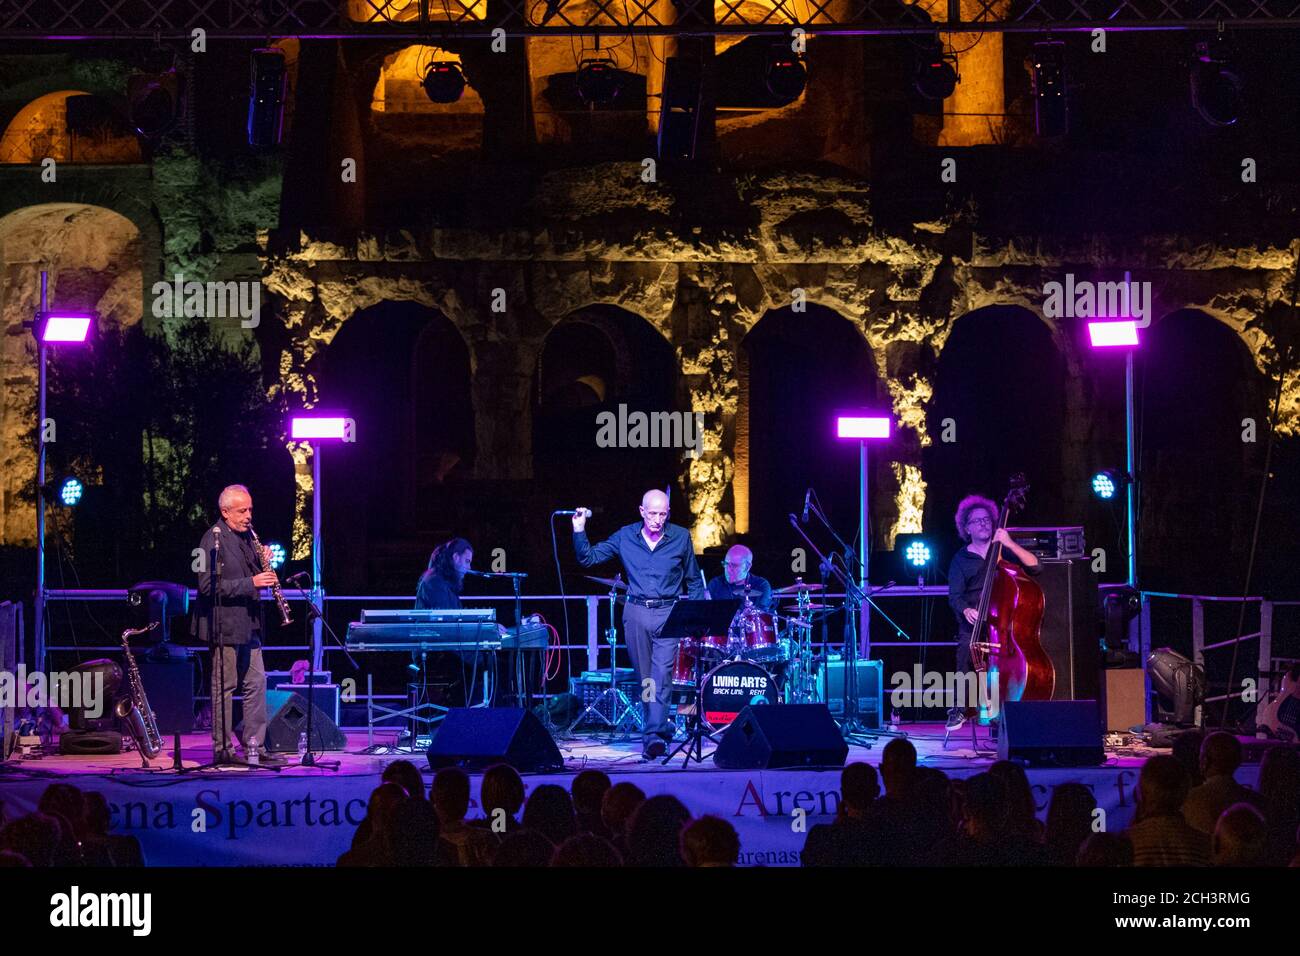 Santa Maria Capua Vetere, Italy. 08th Sep, 2020. The band 'Piccola Orchestra Avion Travel' in concert in the roman amphitheater of Santa Maria Capua Vetere. (Photo by Gennaro Buco/Pacific Press) Credit: Pacific Press Media Production Corp./Alamy Live News Stock Photo